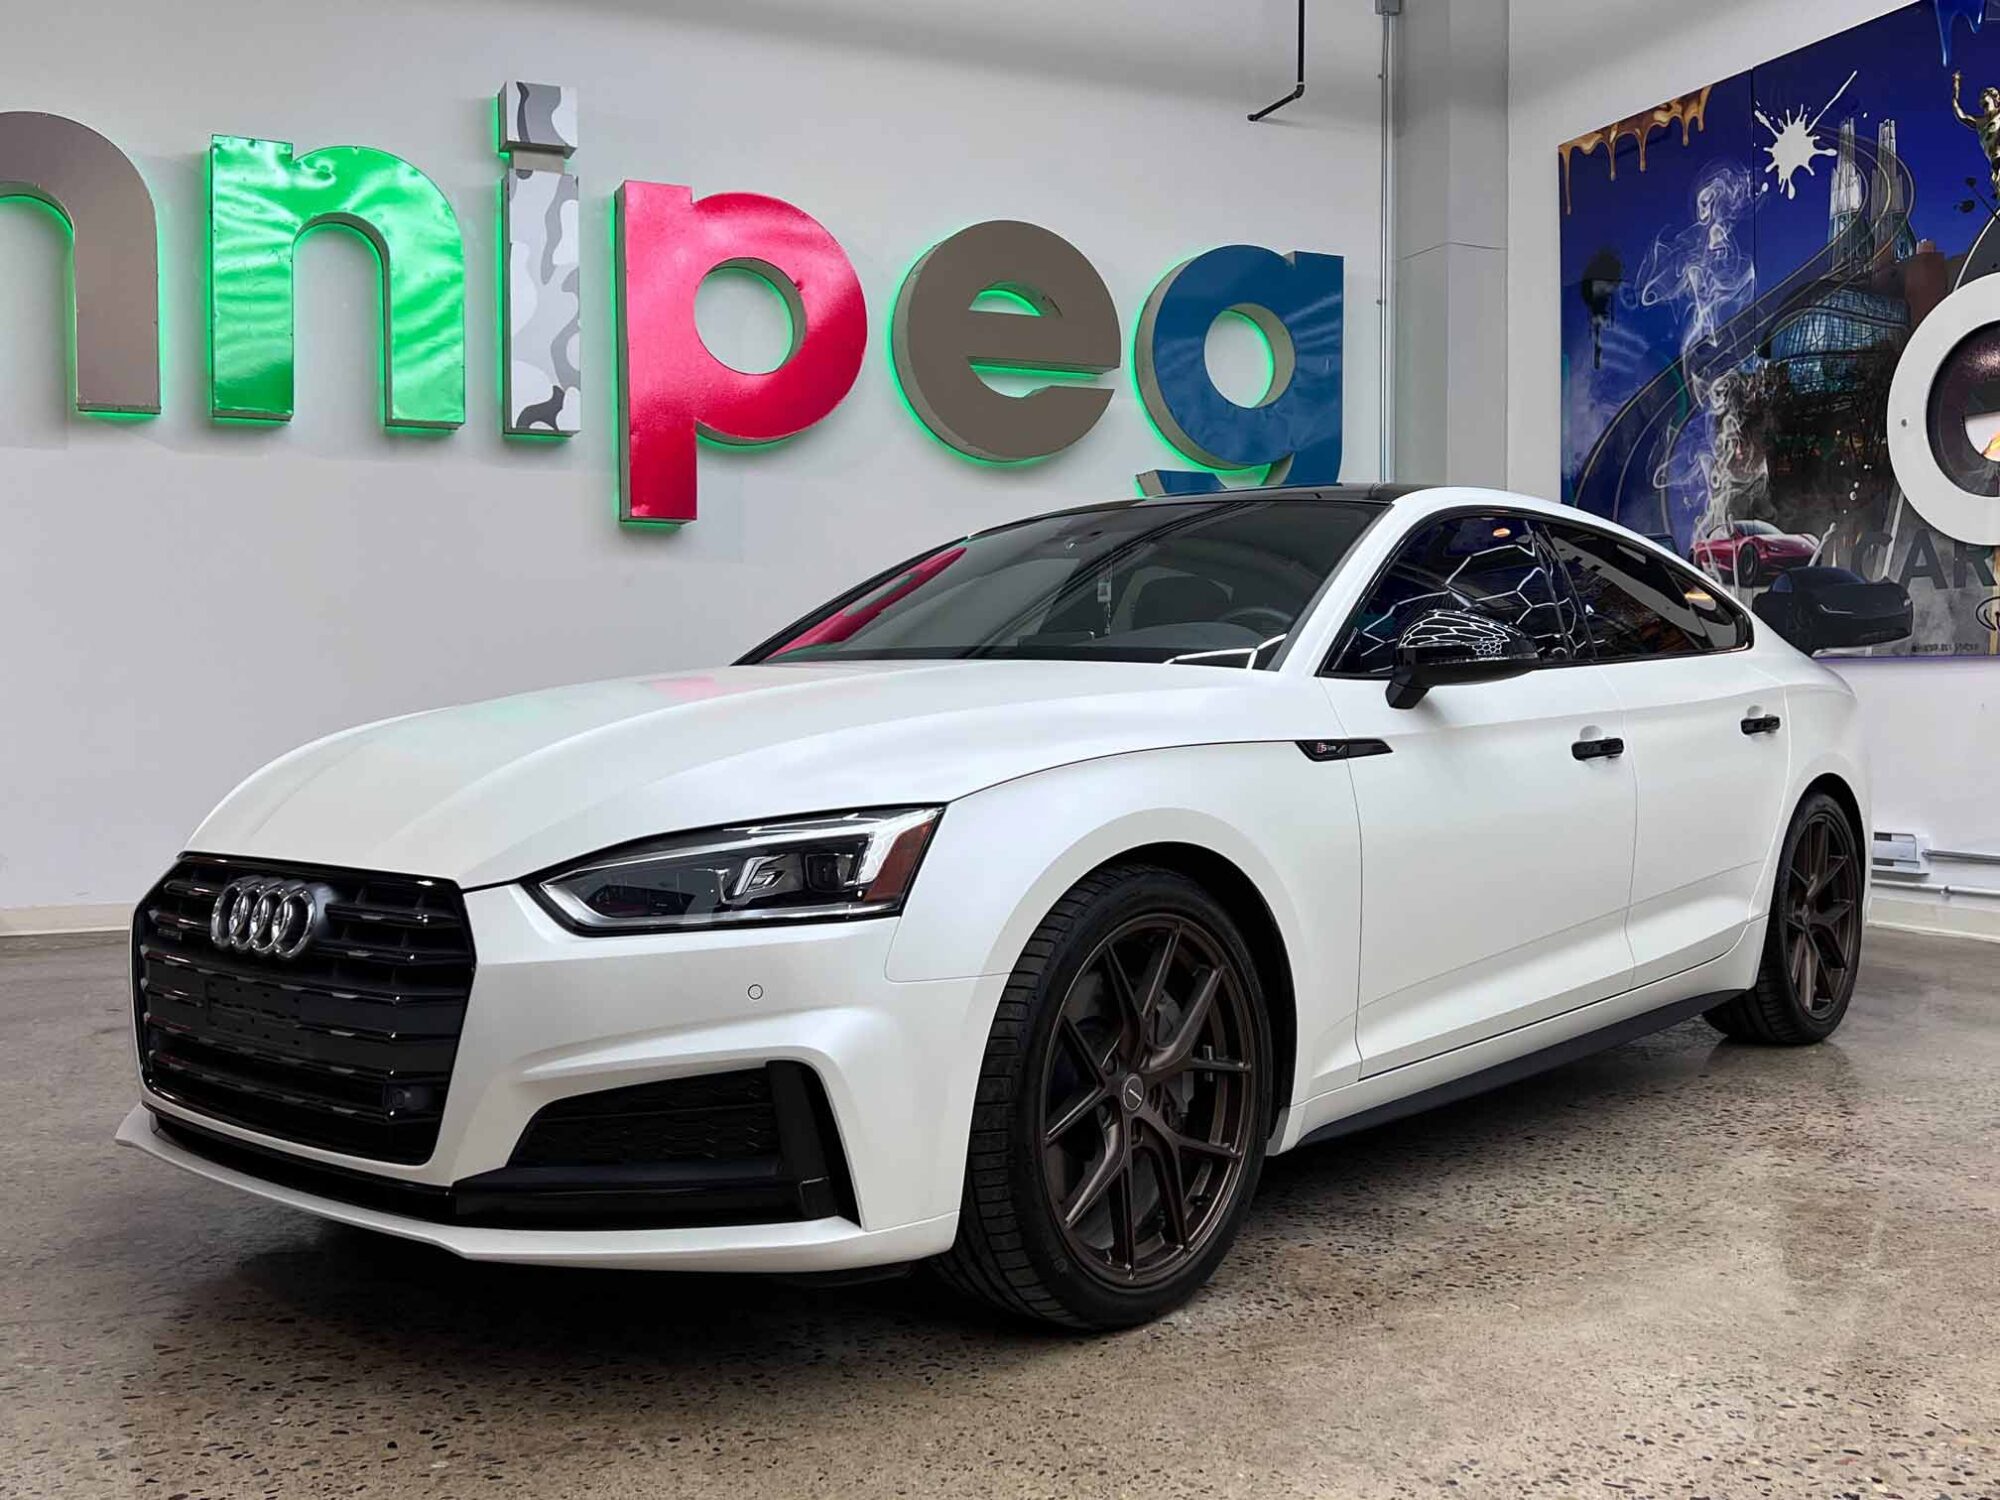 Audi wrap, Business Graphics, Wrap Price, Winnipeg Wrap Price, Wrap Prices Winnipeg, Best Vinyl Wraps Winnipeg, Winnipegs Best Wraps, Wrap, Wrapped, Wrapping, Wrappers